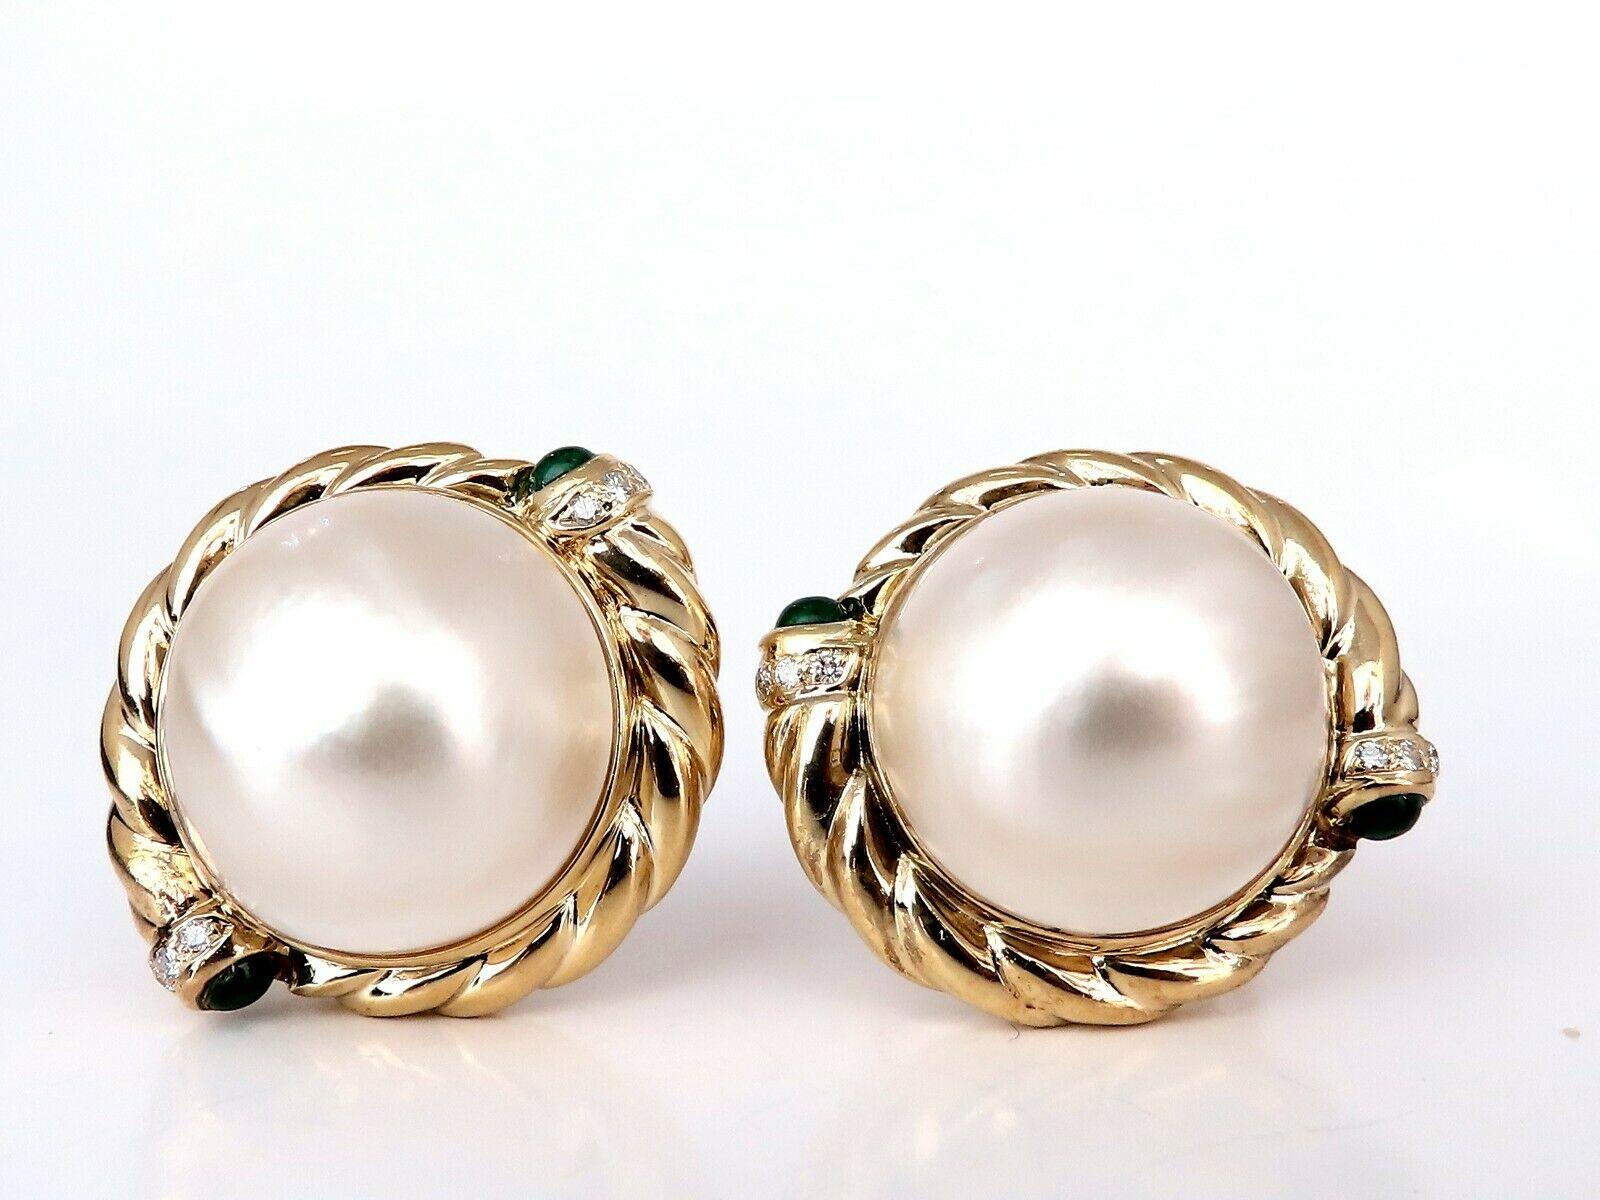 Cabochon Mabe Pearls .80ct Emerald Clip Earrings 18kt Gold For Sale